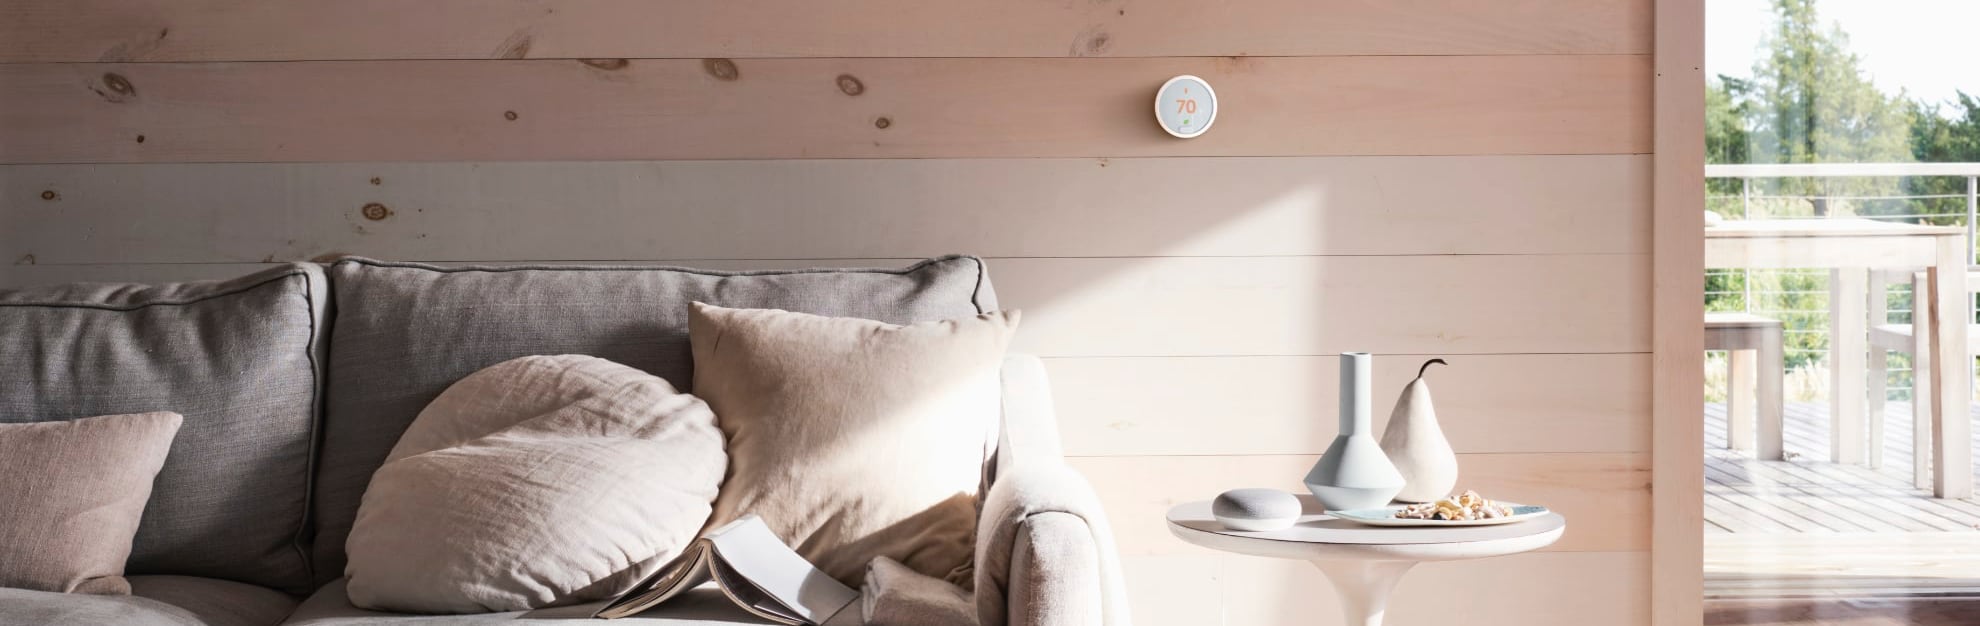 Vivint Home Automation in Manchester